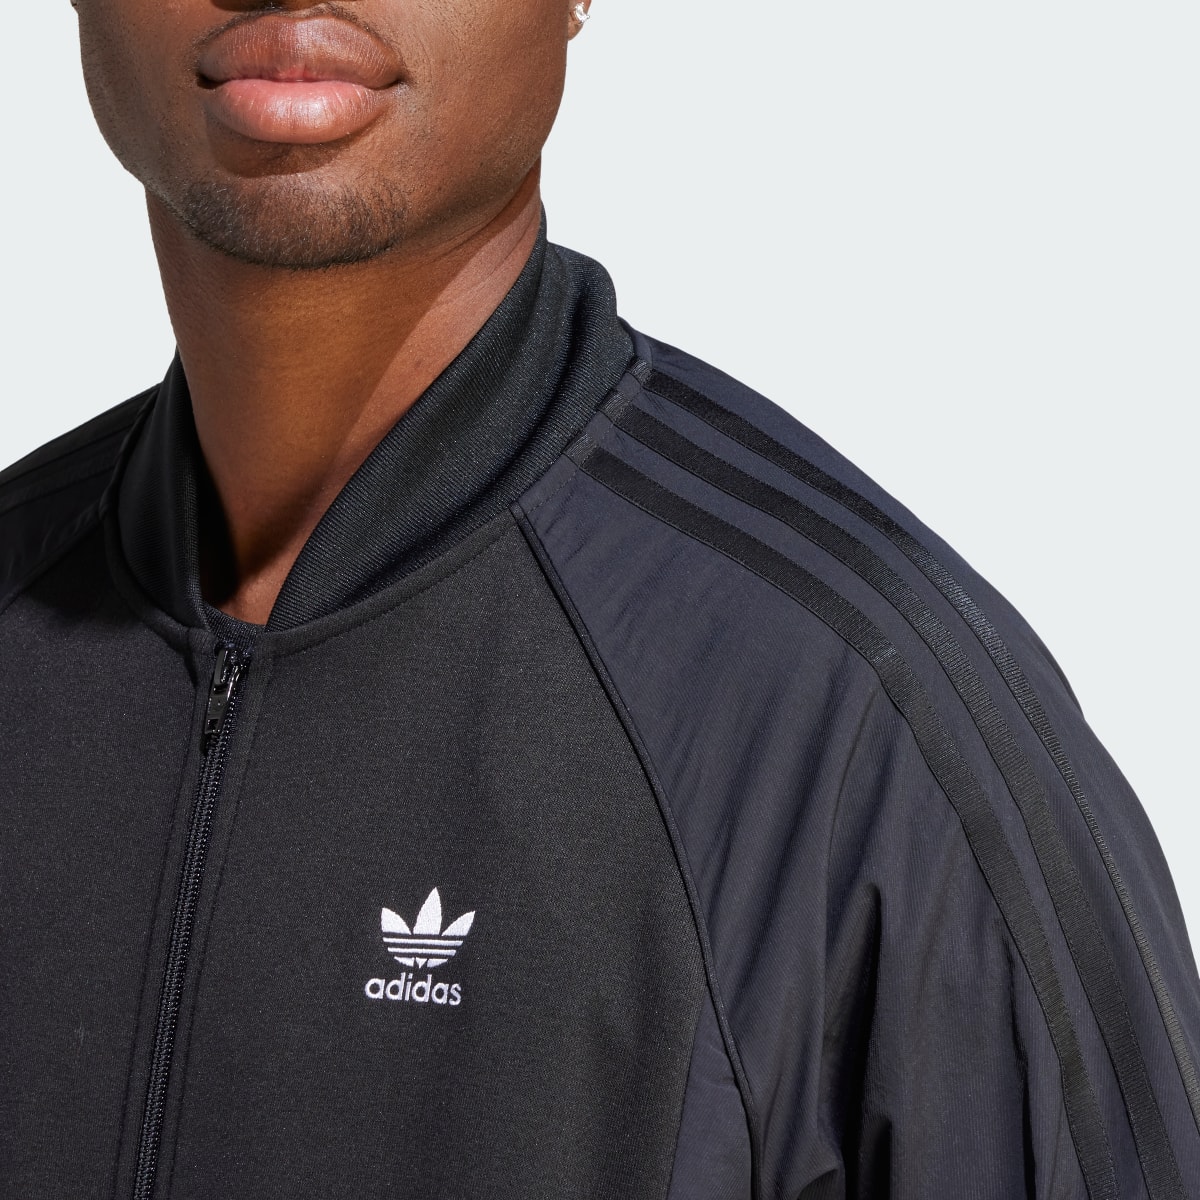 Adidas Track jacket adicolor Re-Pro SST Material Mix. 6